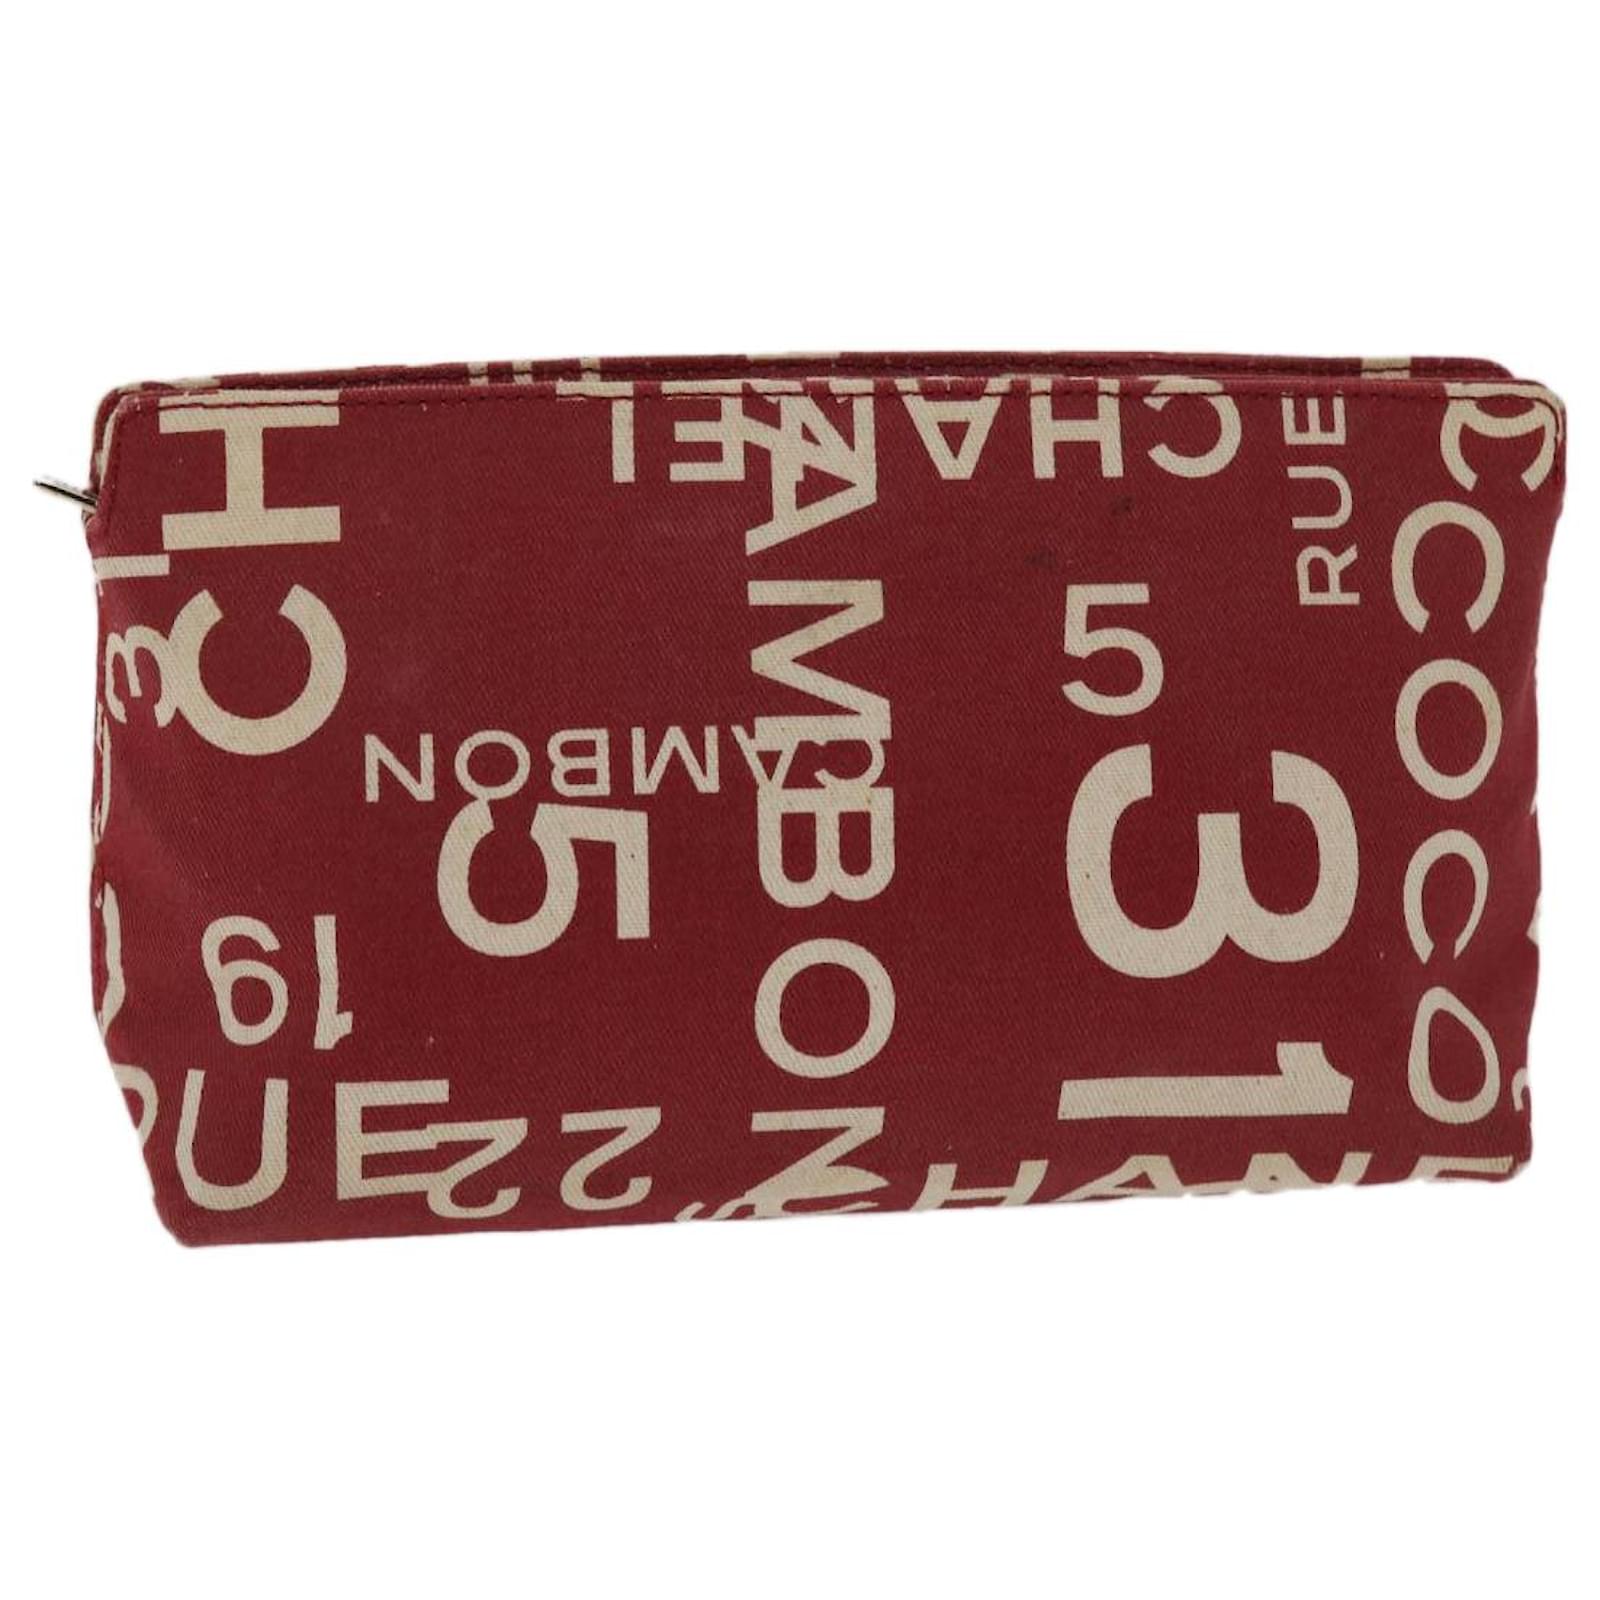 CHANEL Beaute Makeup Vintage New Cosmetic Bag 6 x 4.5 x 2 Deep Red Velvet  & Box